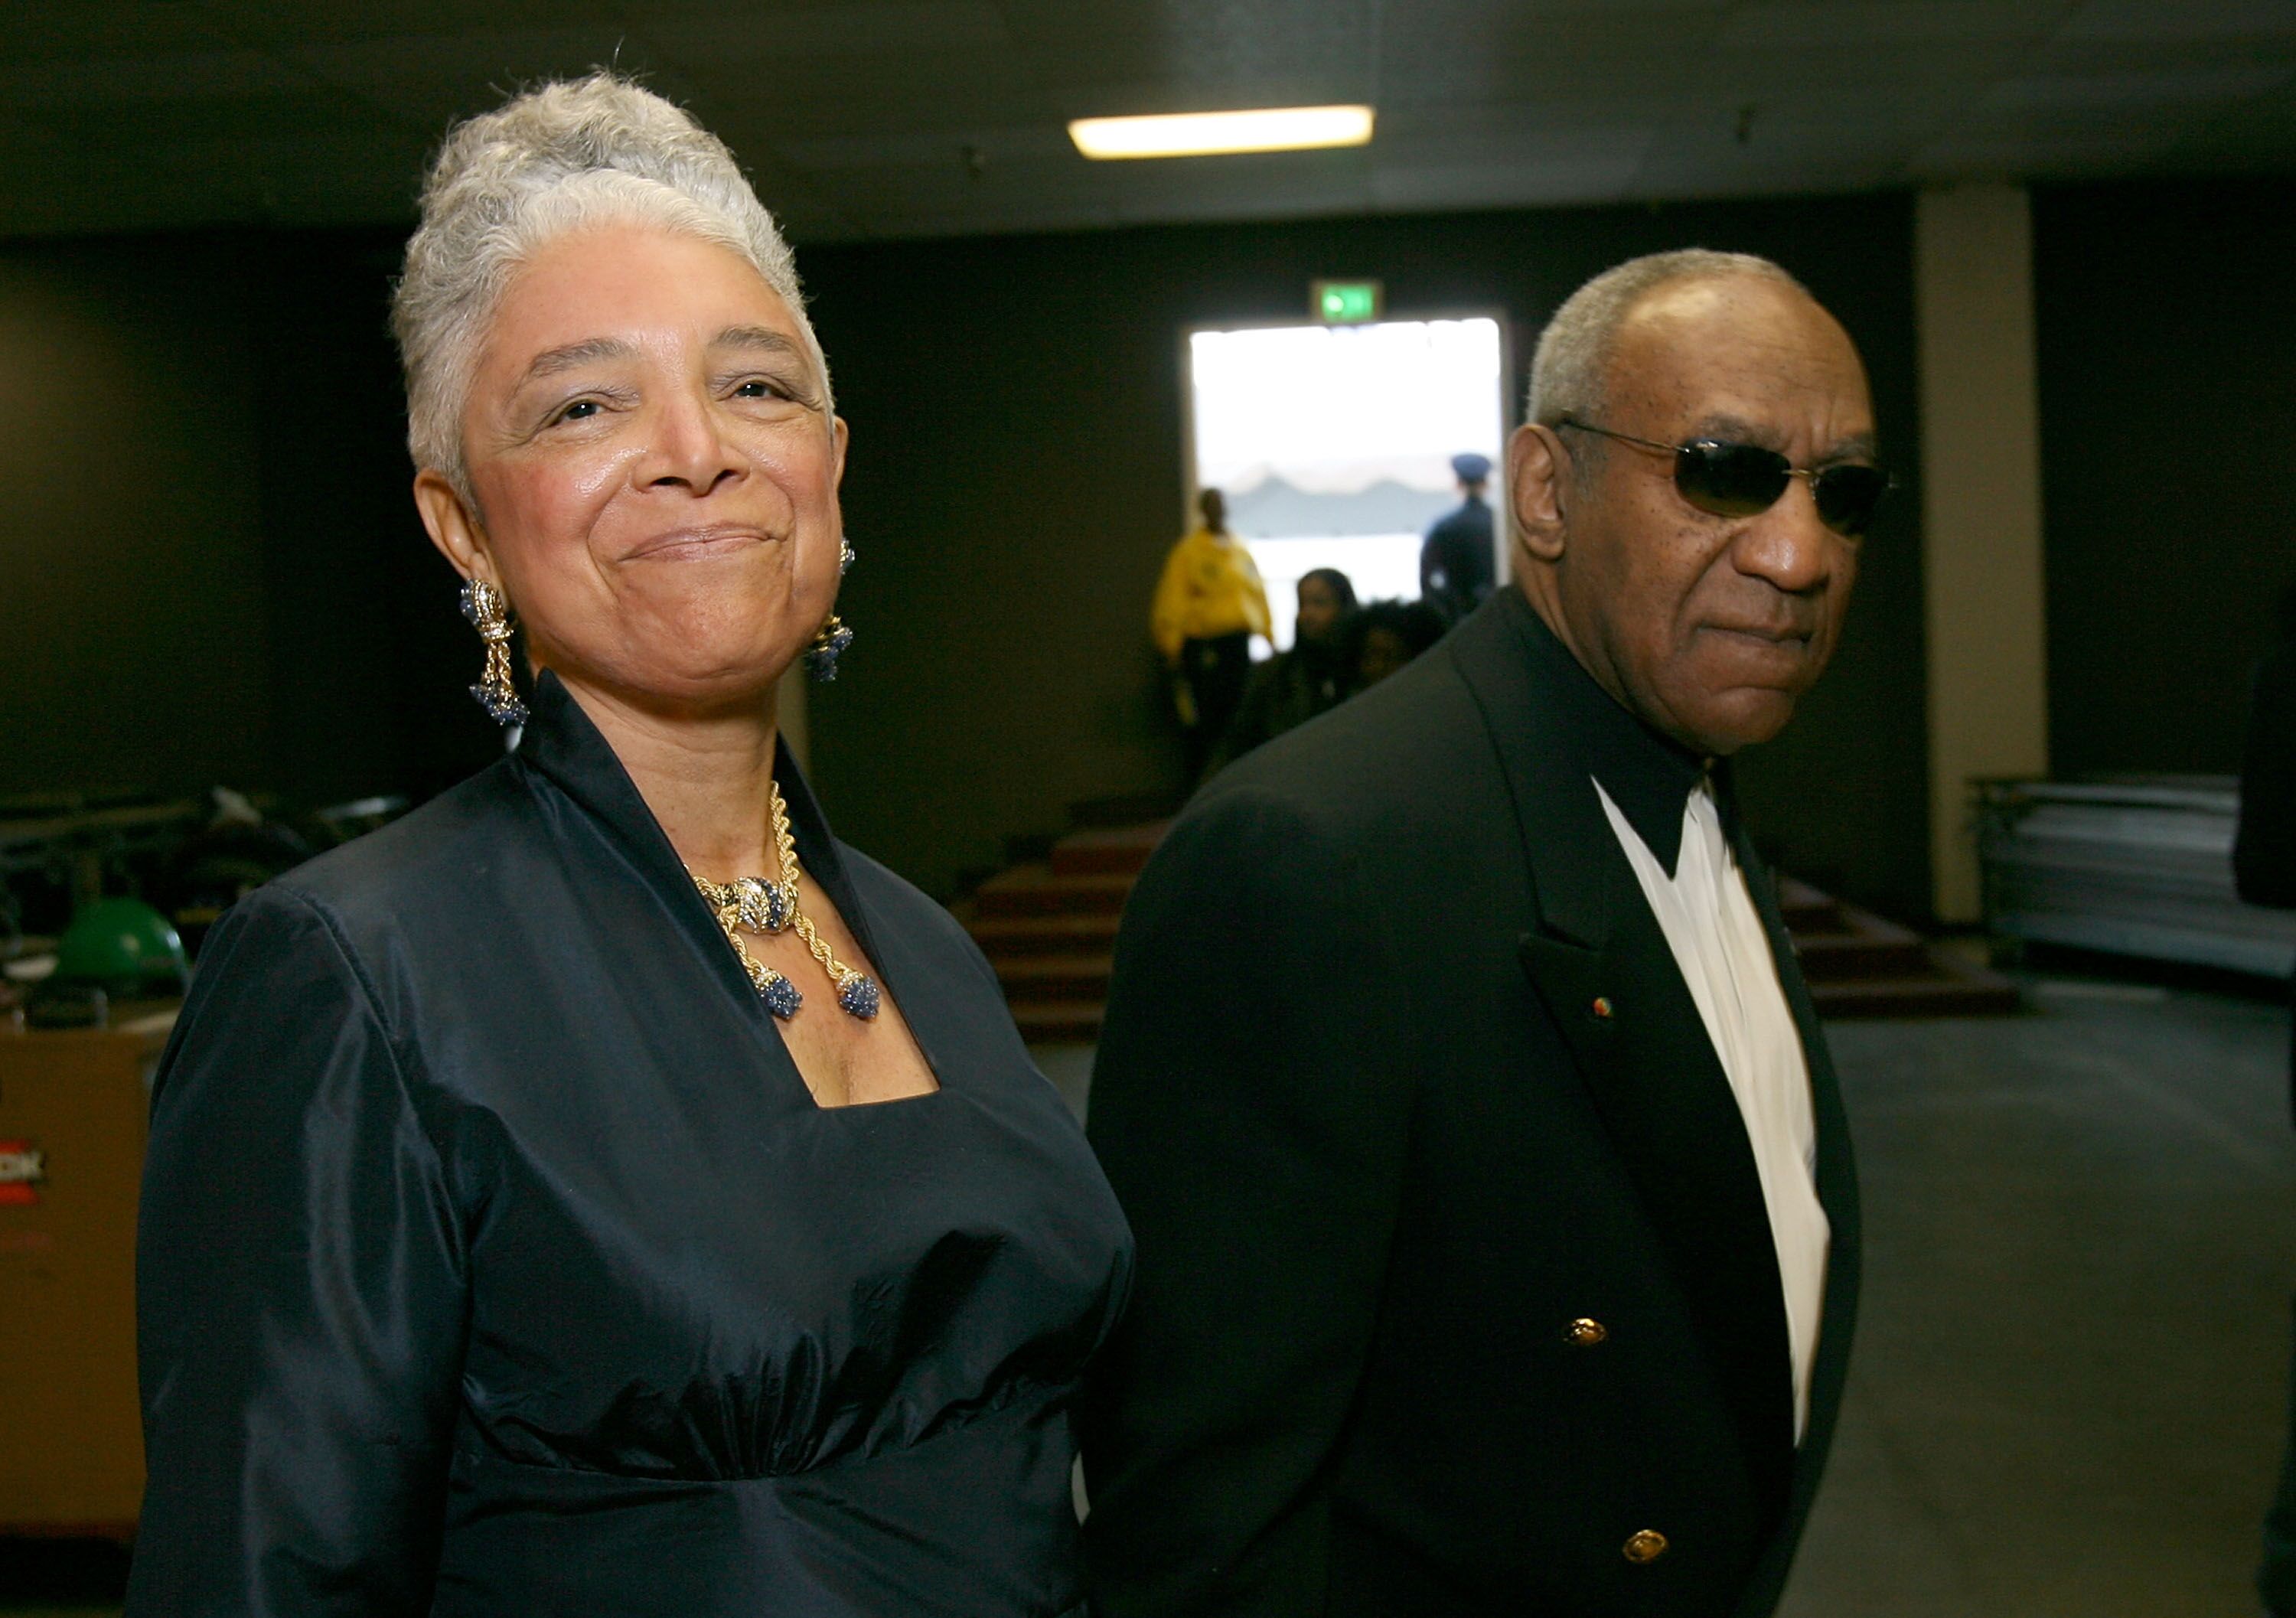 Bill Cosby and wife Camille Cosby at the annual NAACP Image Awards on March 2, 2007 | Source: Getty Images